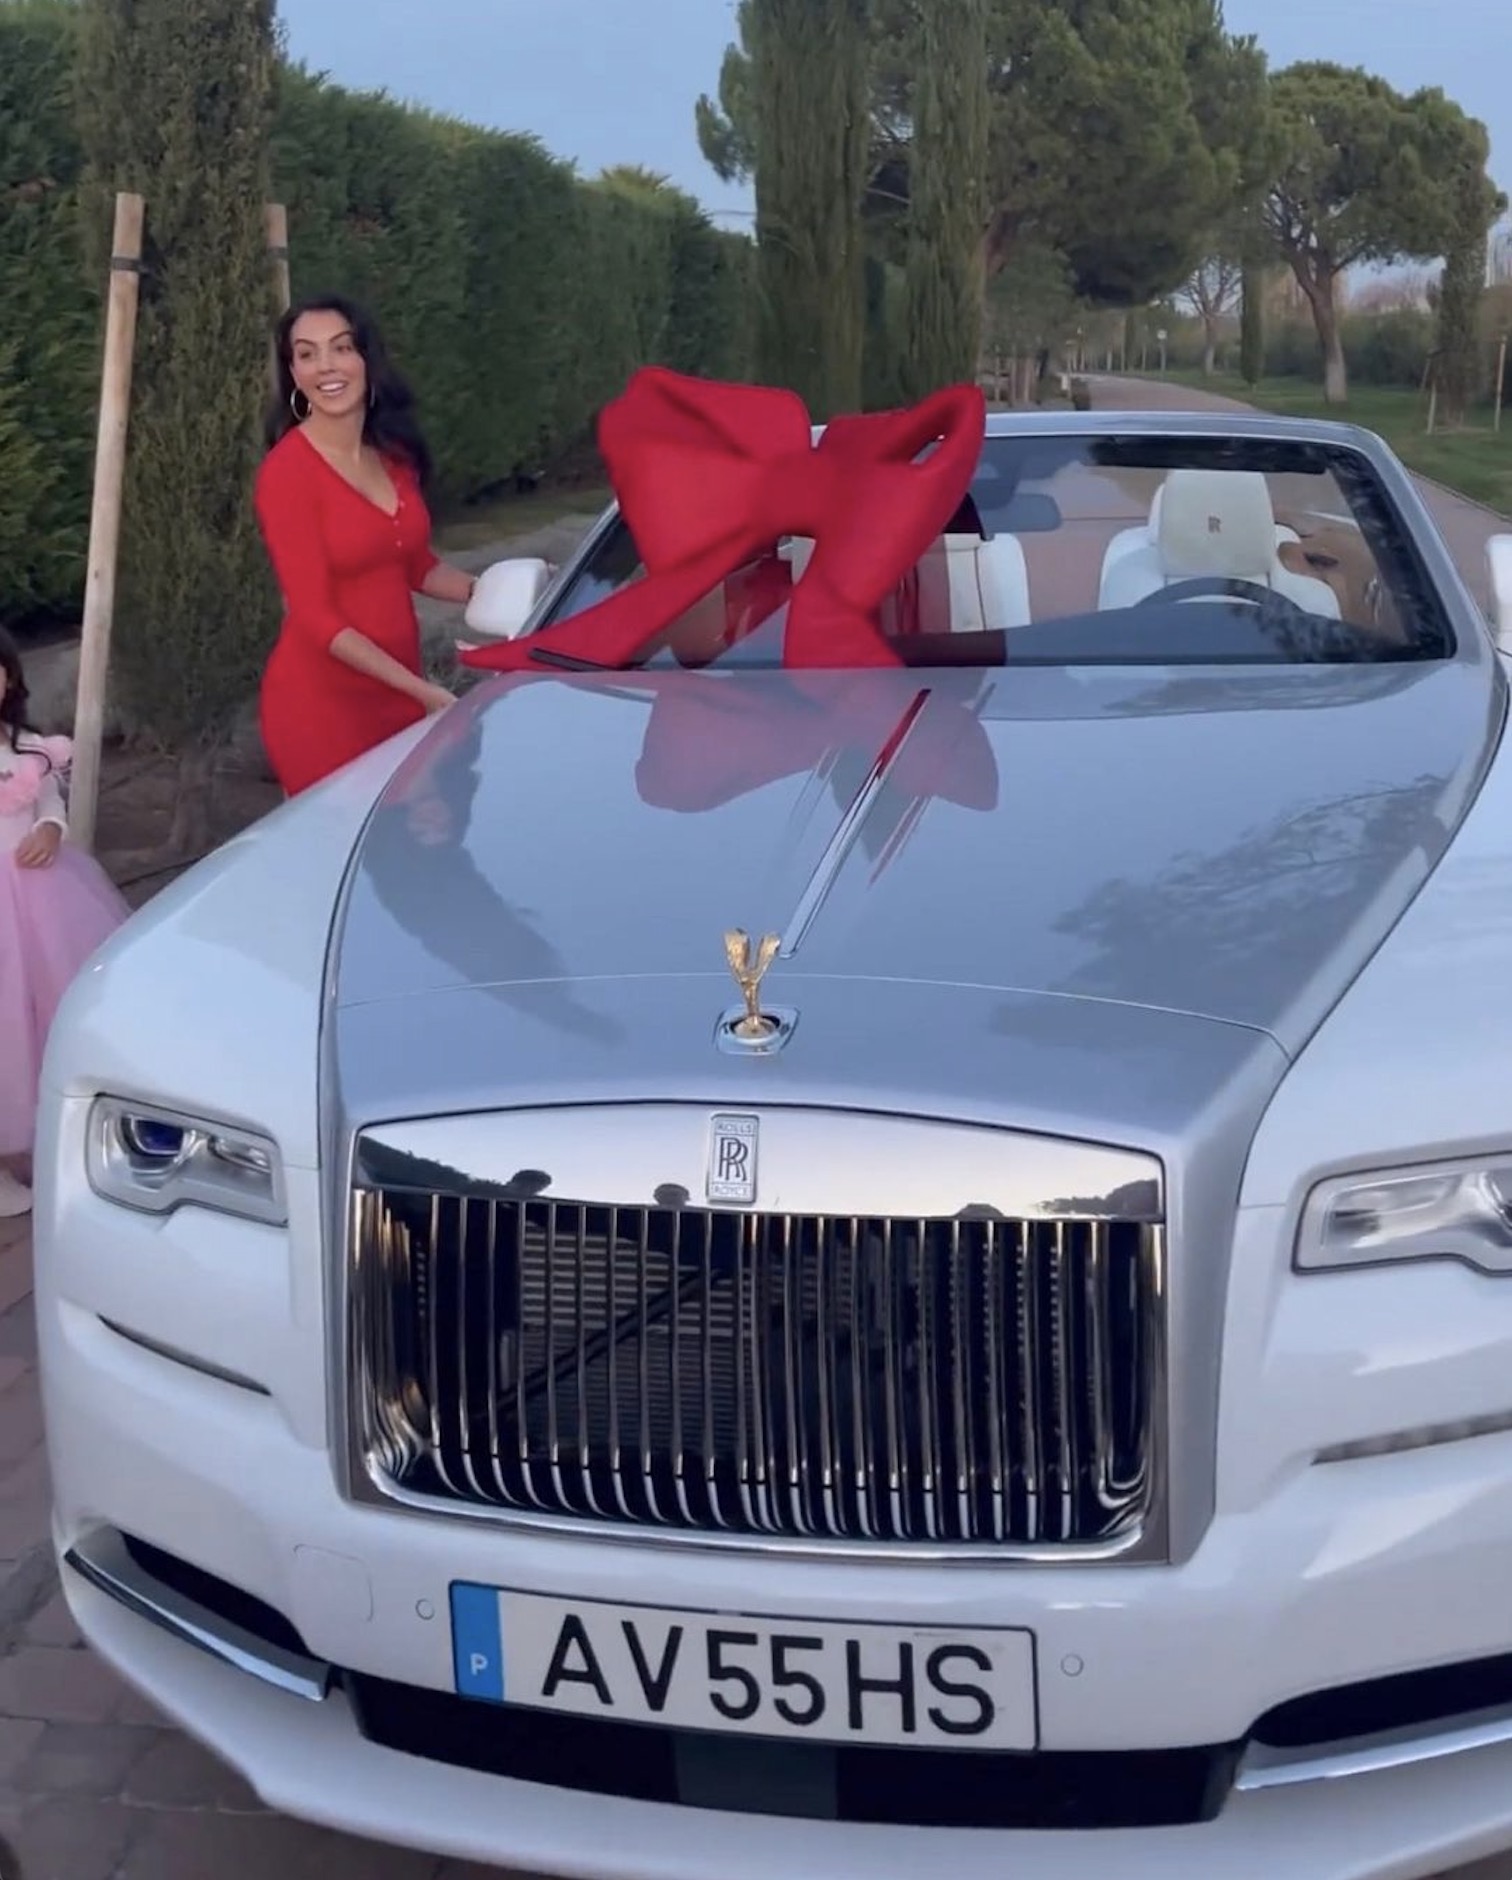 The most ostentatious and extravagant gifts Ronaldo ever received in his life at the age 38